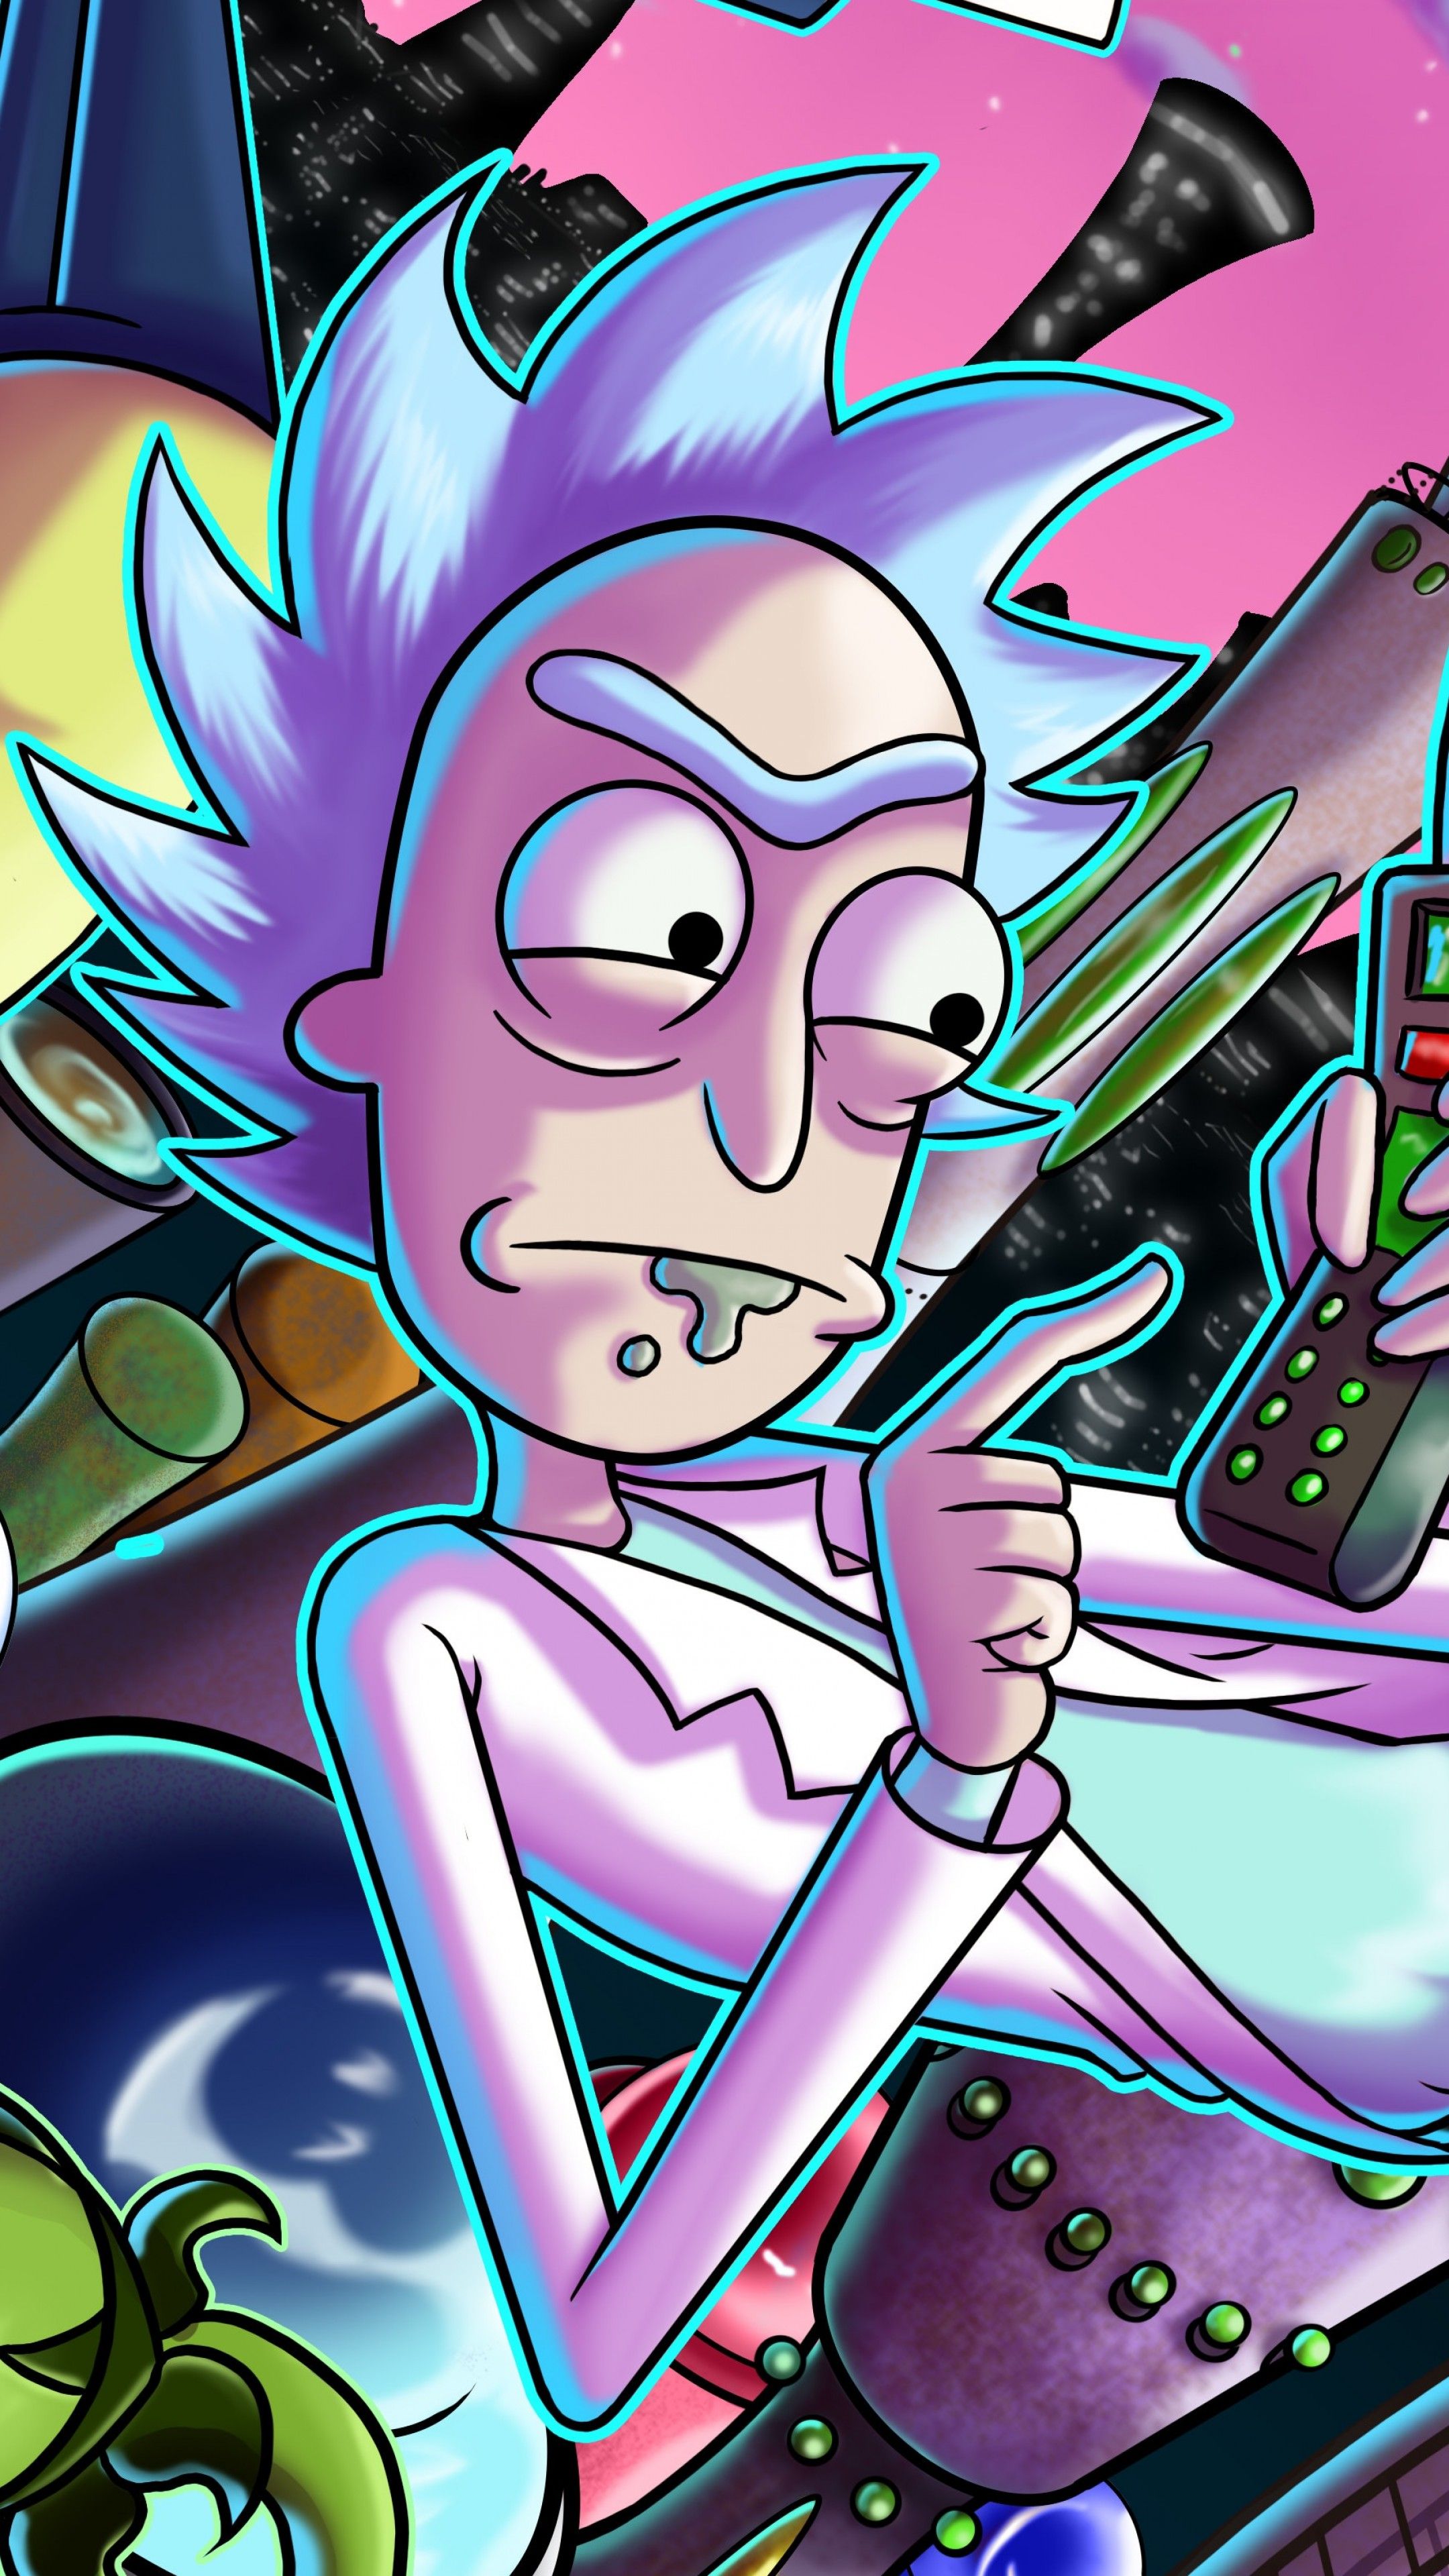 BEST WALLPAPER: Wallpaper Pc Rick And Morty